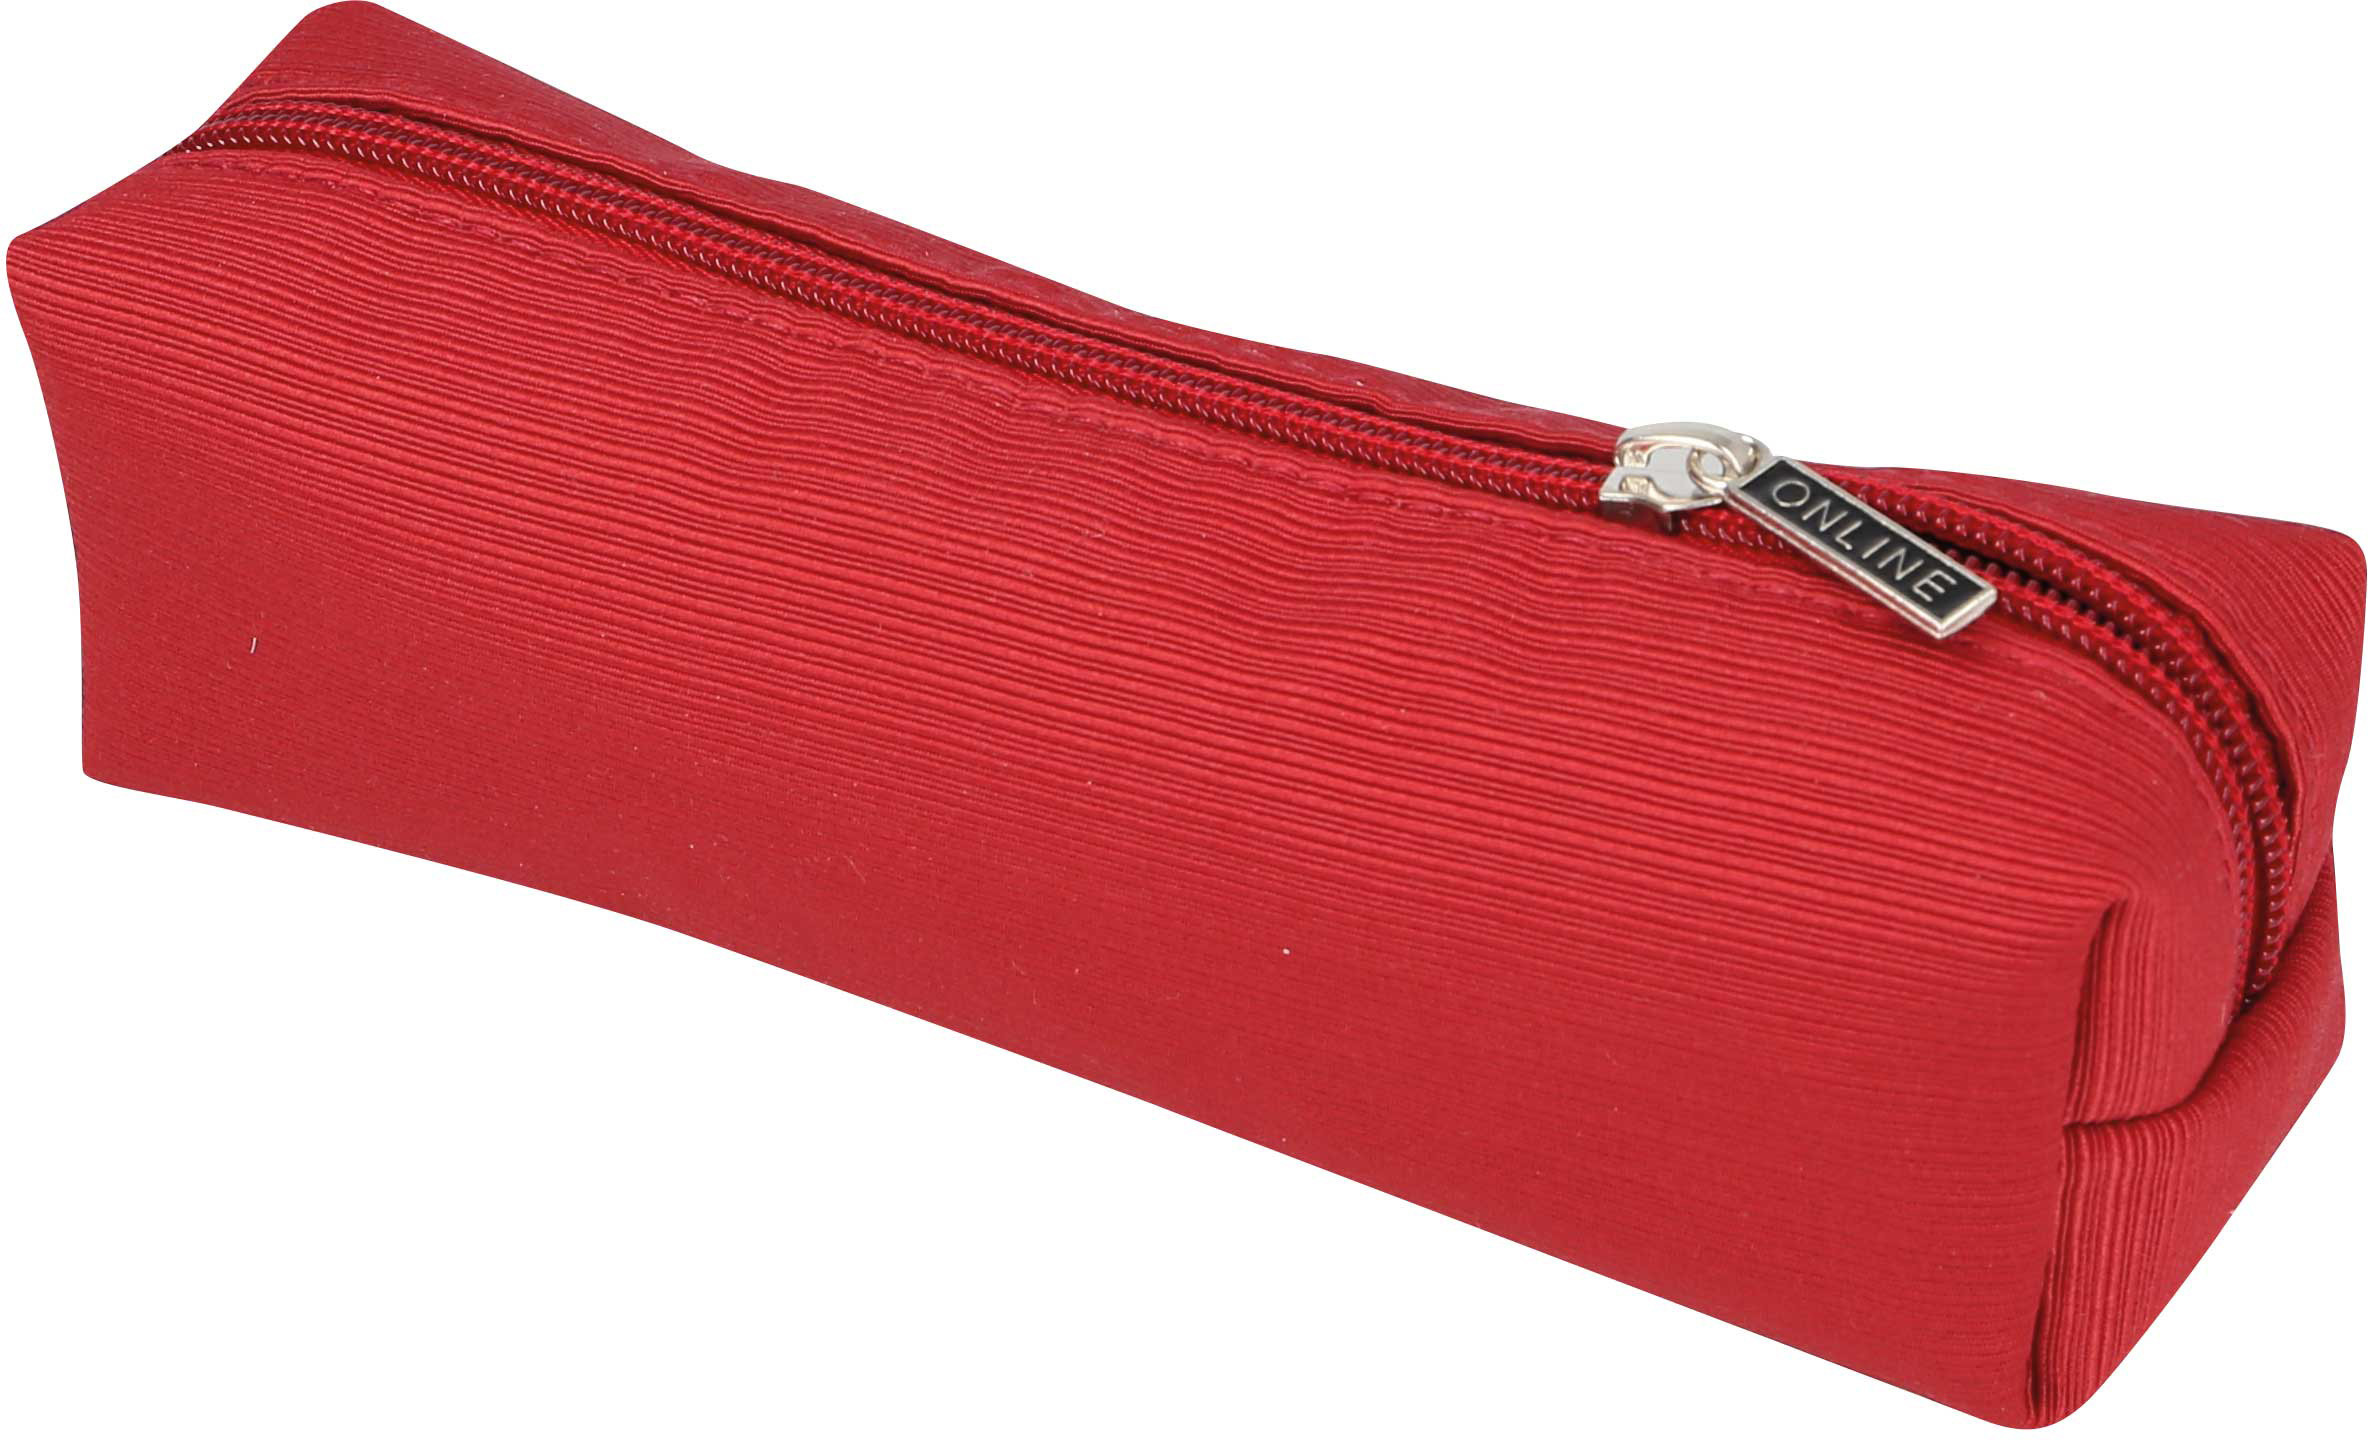 ONLINE Trousse 16979/6 Indian Summer Red 20x6cm